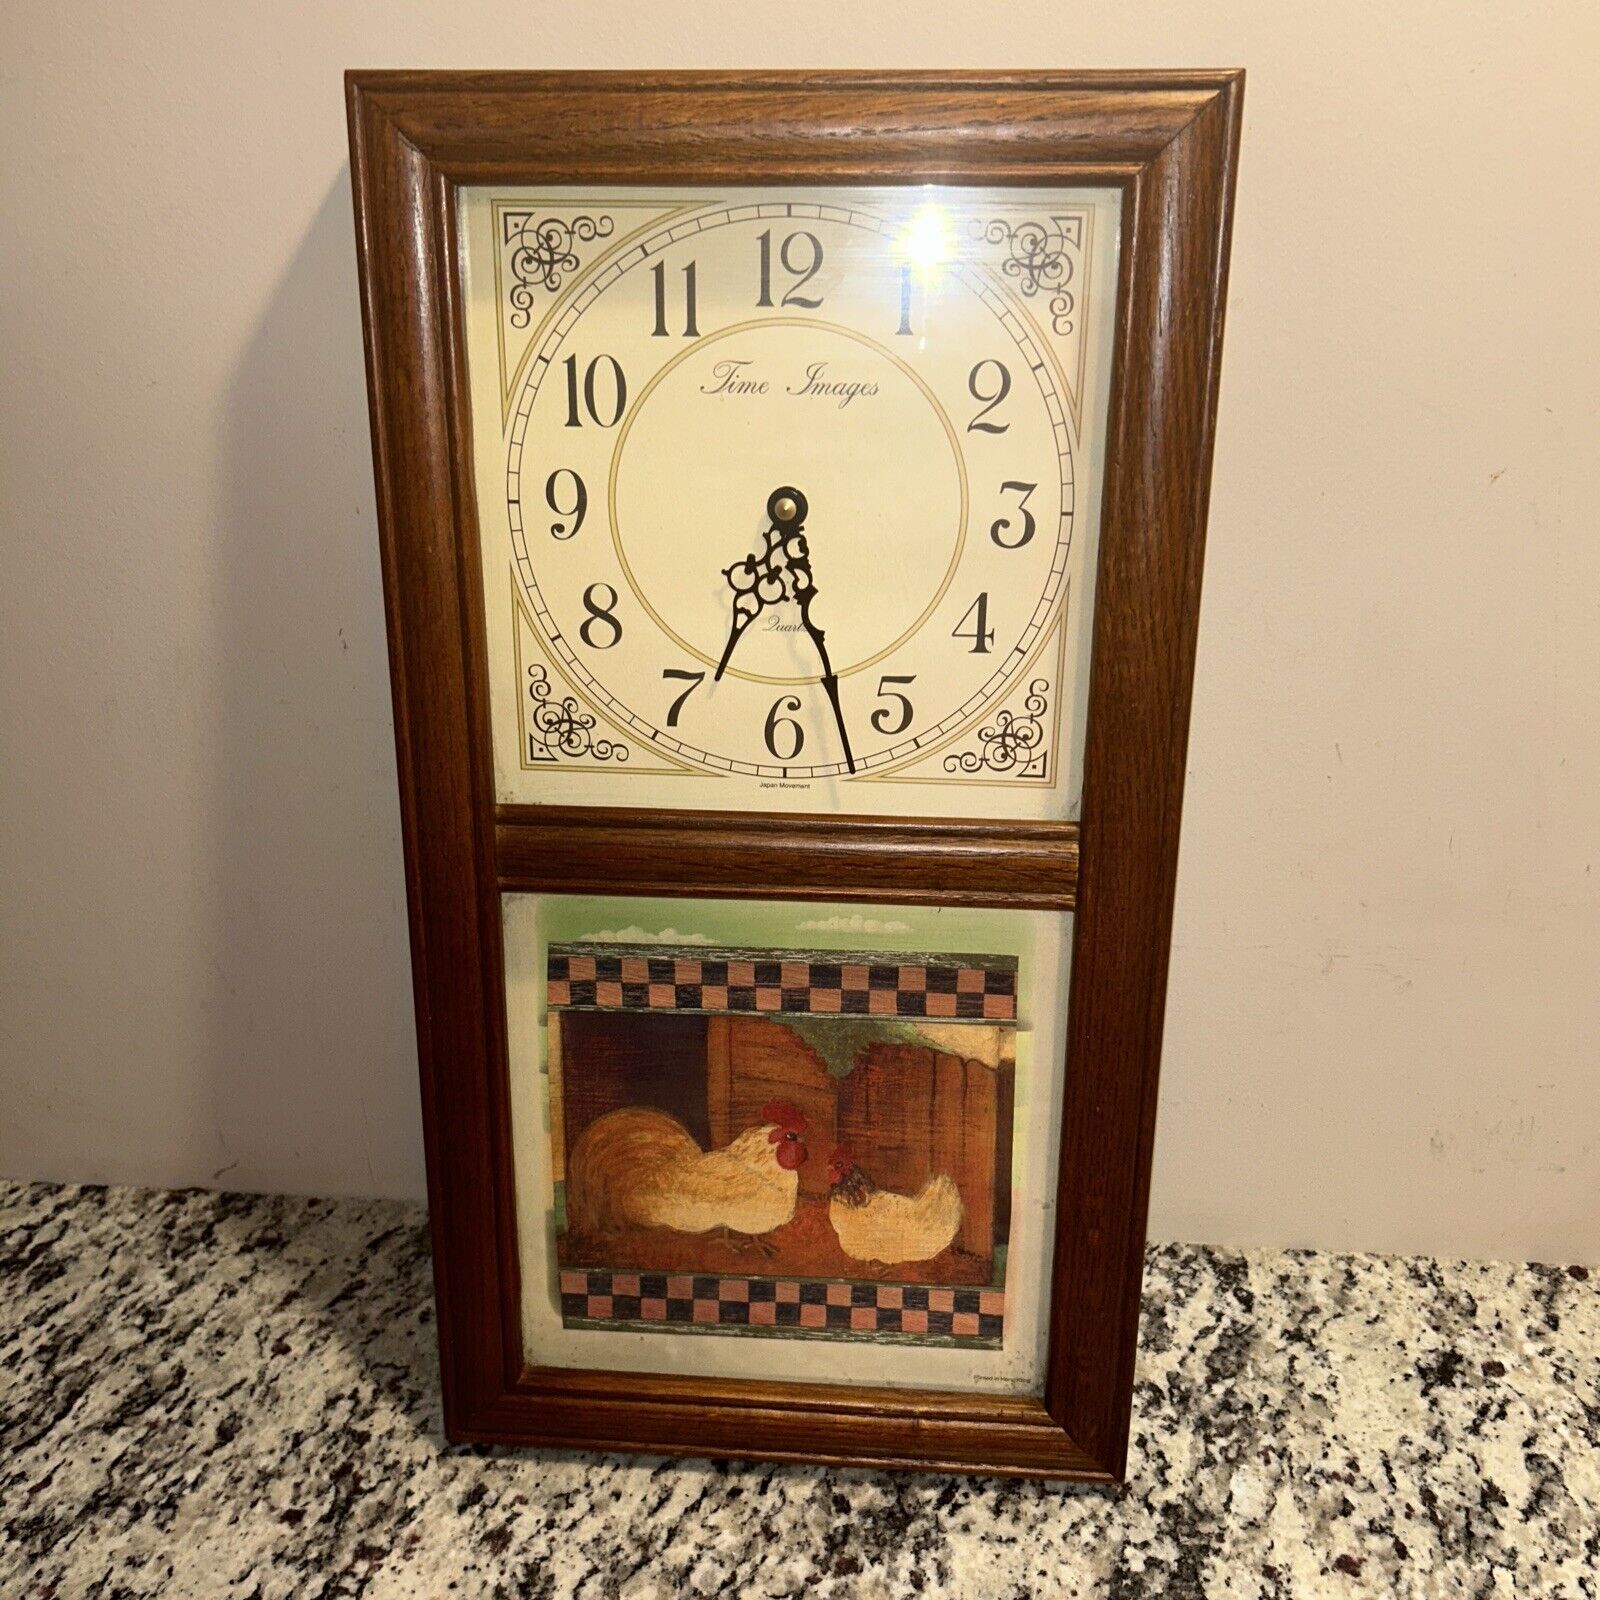 Vintage Quartz Digital Clock by Time Images - with Roosters Printed in Hong Kong